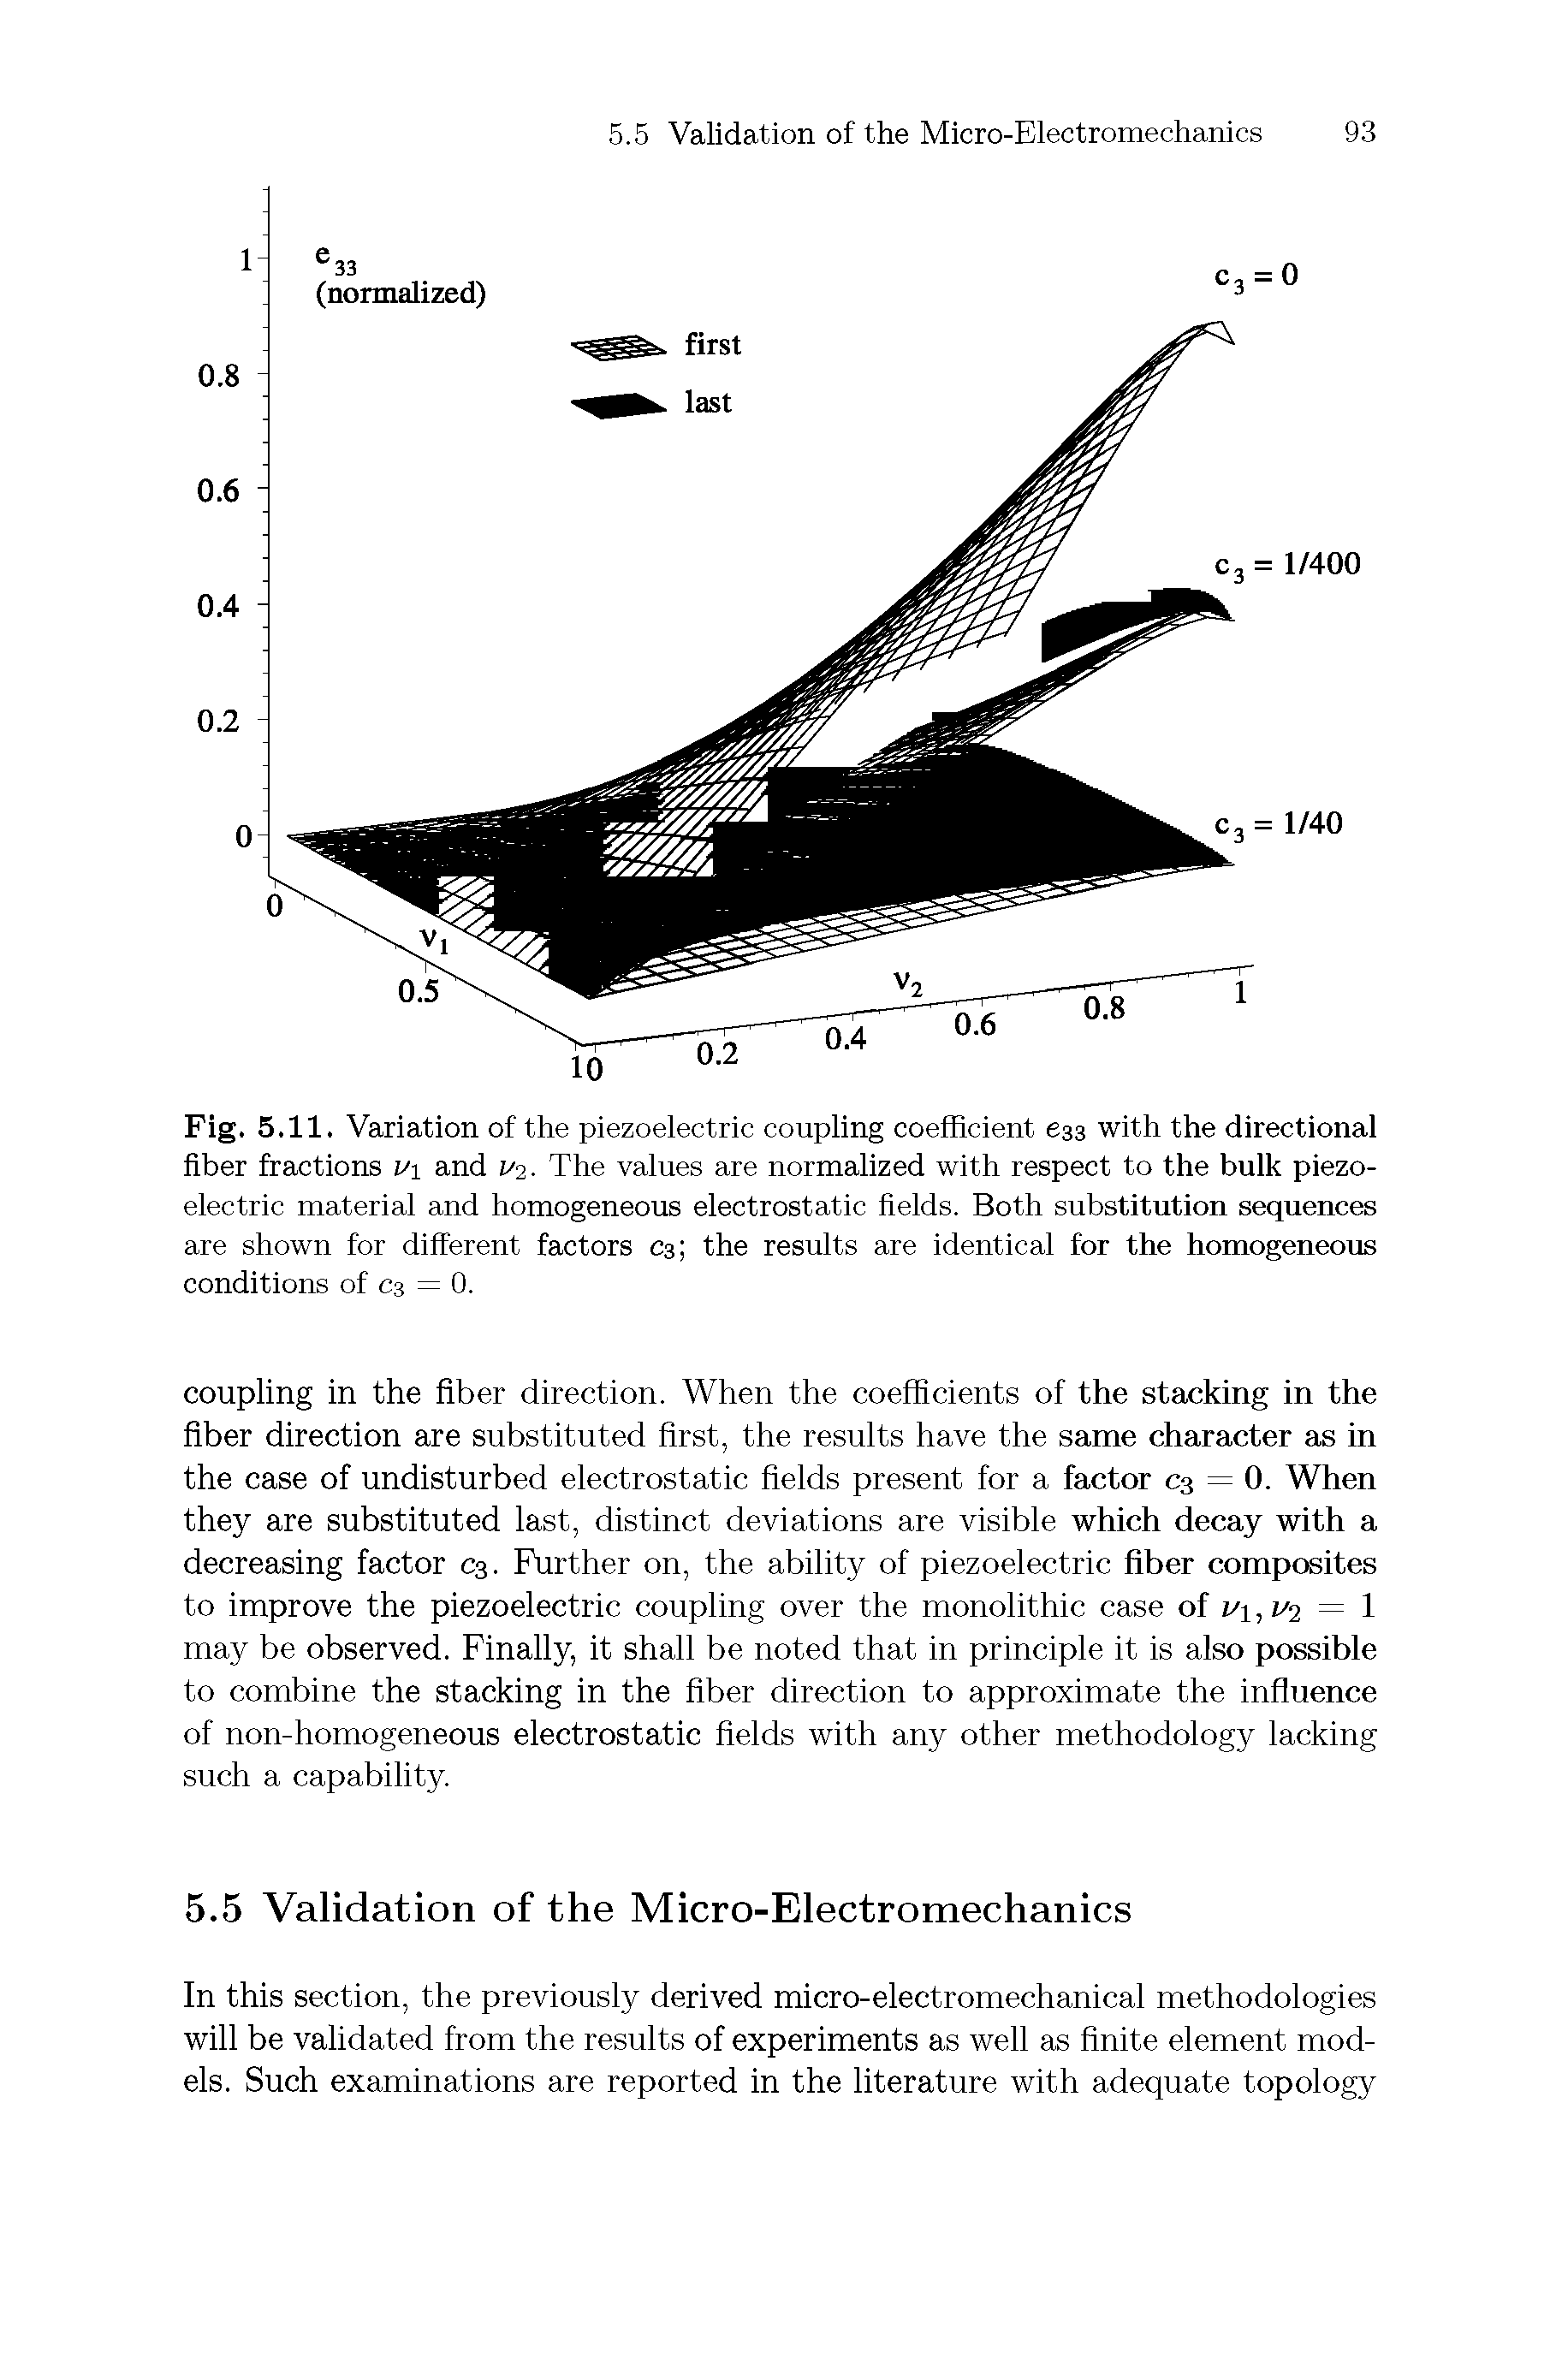 Fig. 5.11. Variation of the piezoelectric coupling coefficient 633 with the directional fiber fractions and V2. The values are normalized with respect to the bulk piezoelectric material and homogeneous electrostatic fields. Both substitution sequences are shown for different factors C3 the results are identical for the homogeneous conditions of C3 = 0.